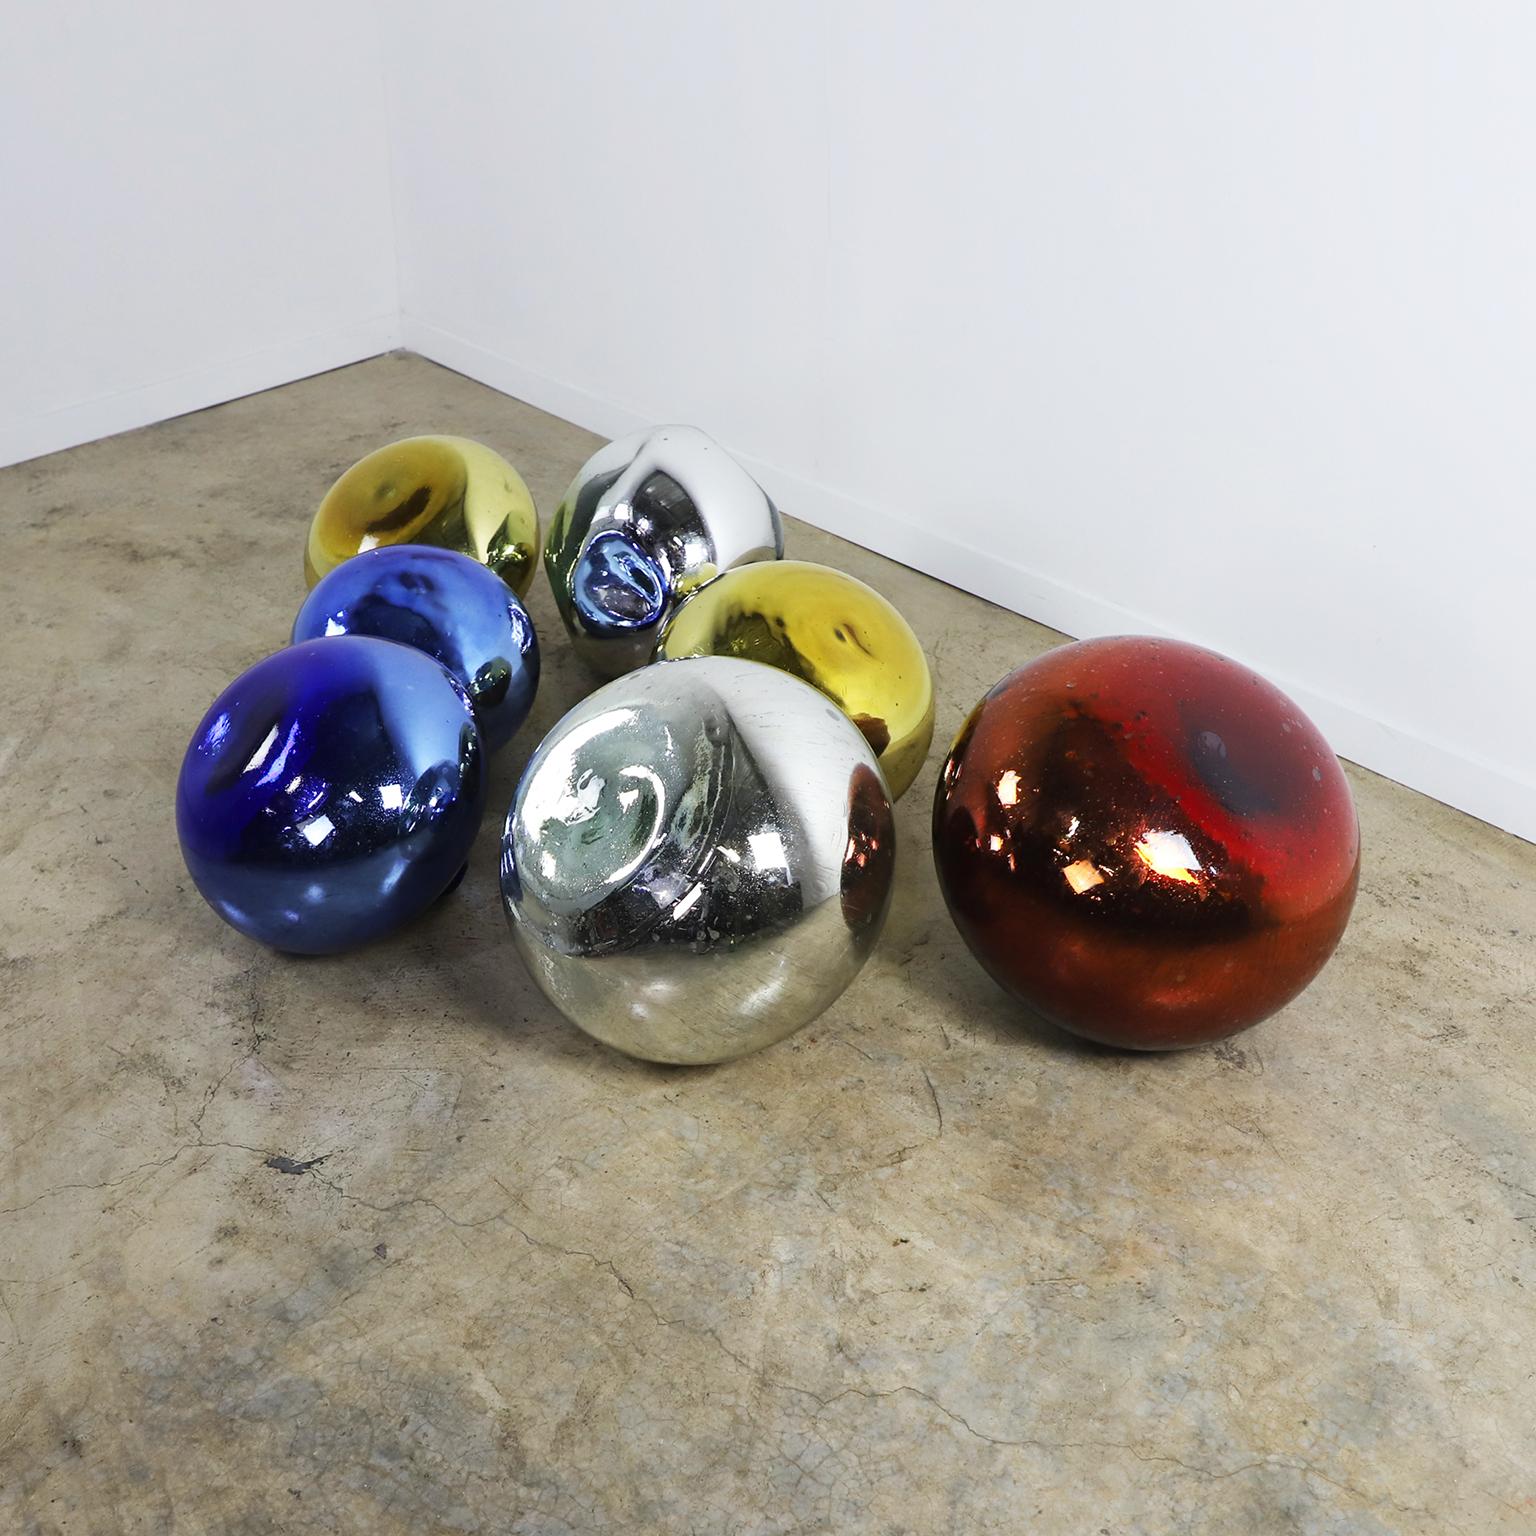 Circa 1950, Made in Mexico we offer this Set of Giant Mexican Modernism Mercury Glass Spheres totally handmade.